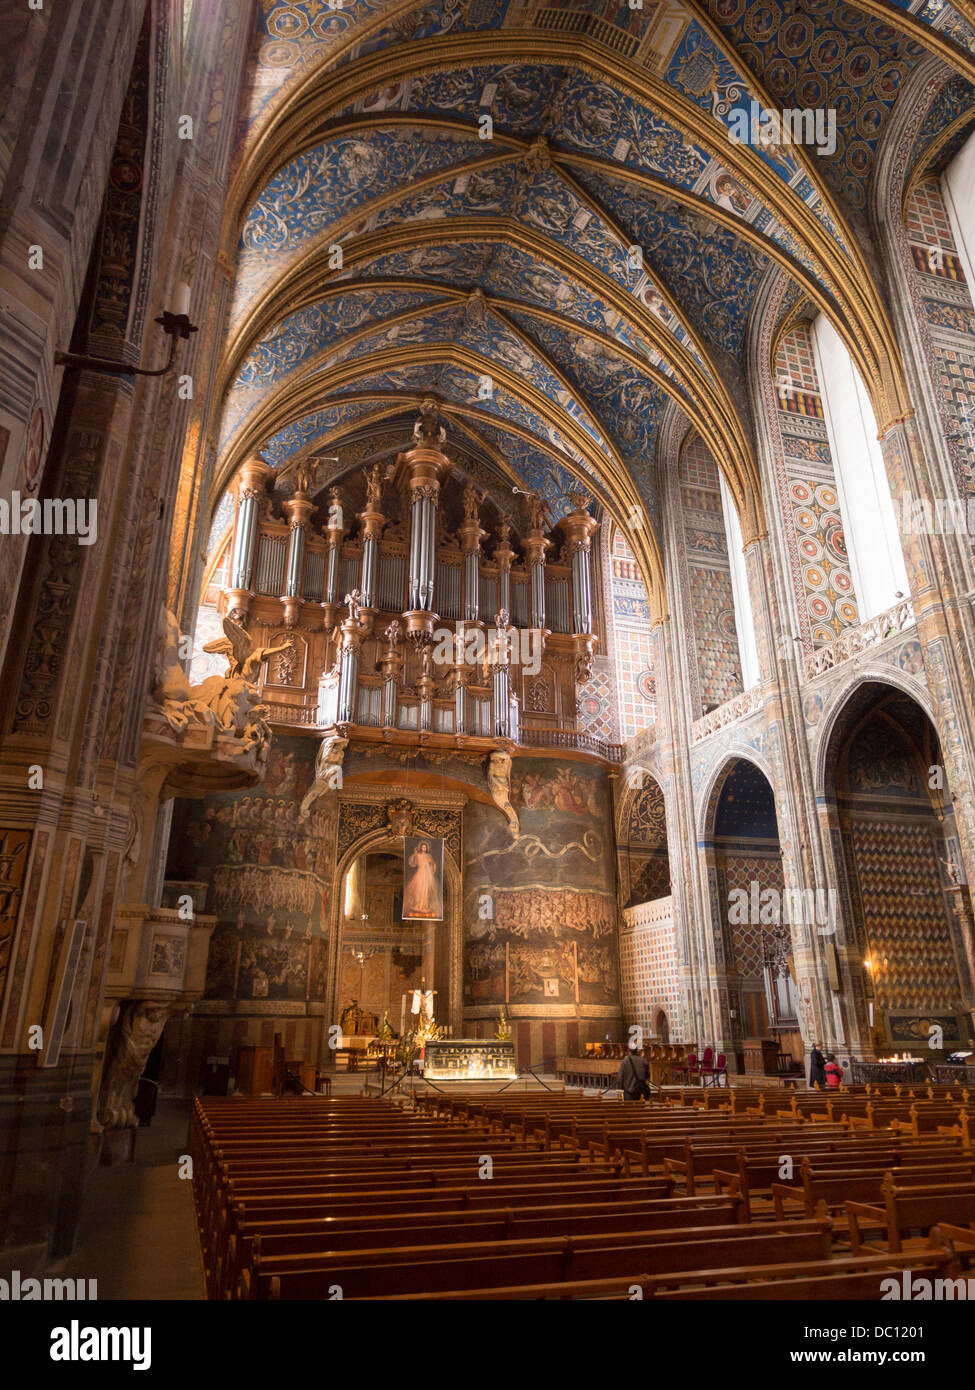 Altar and the Last Judgement mural with Organ Pipes, pews. The front of the massive cathedral in Albi Stock Photo